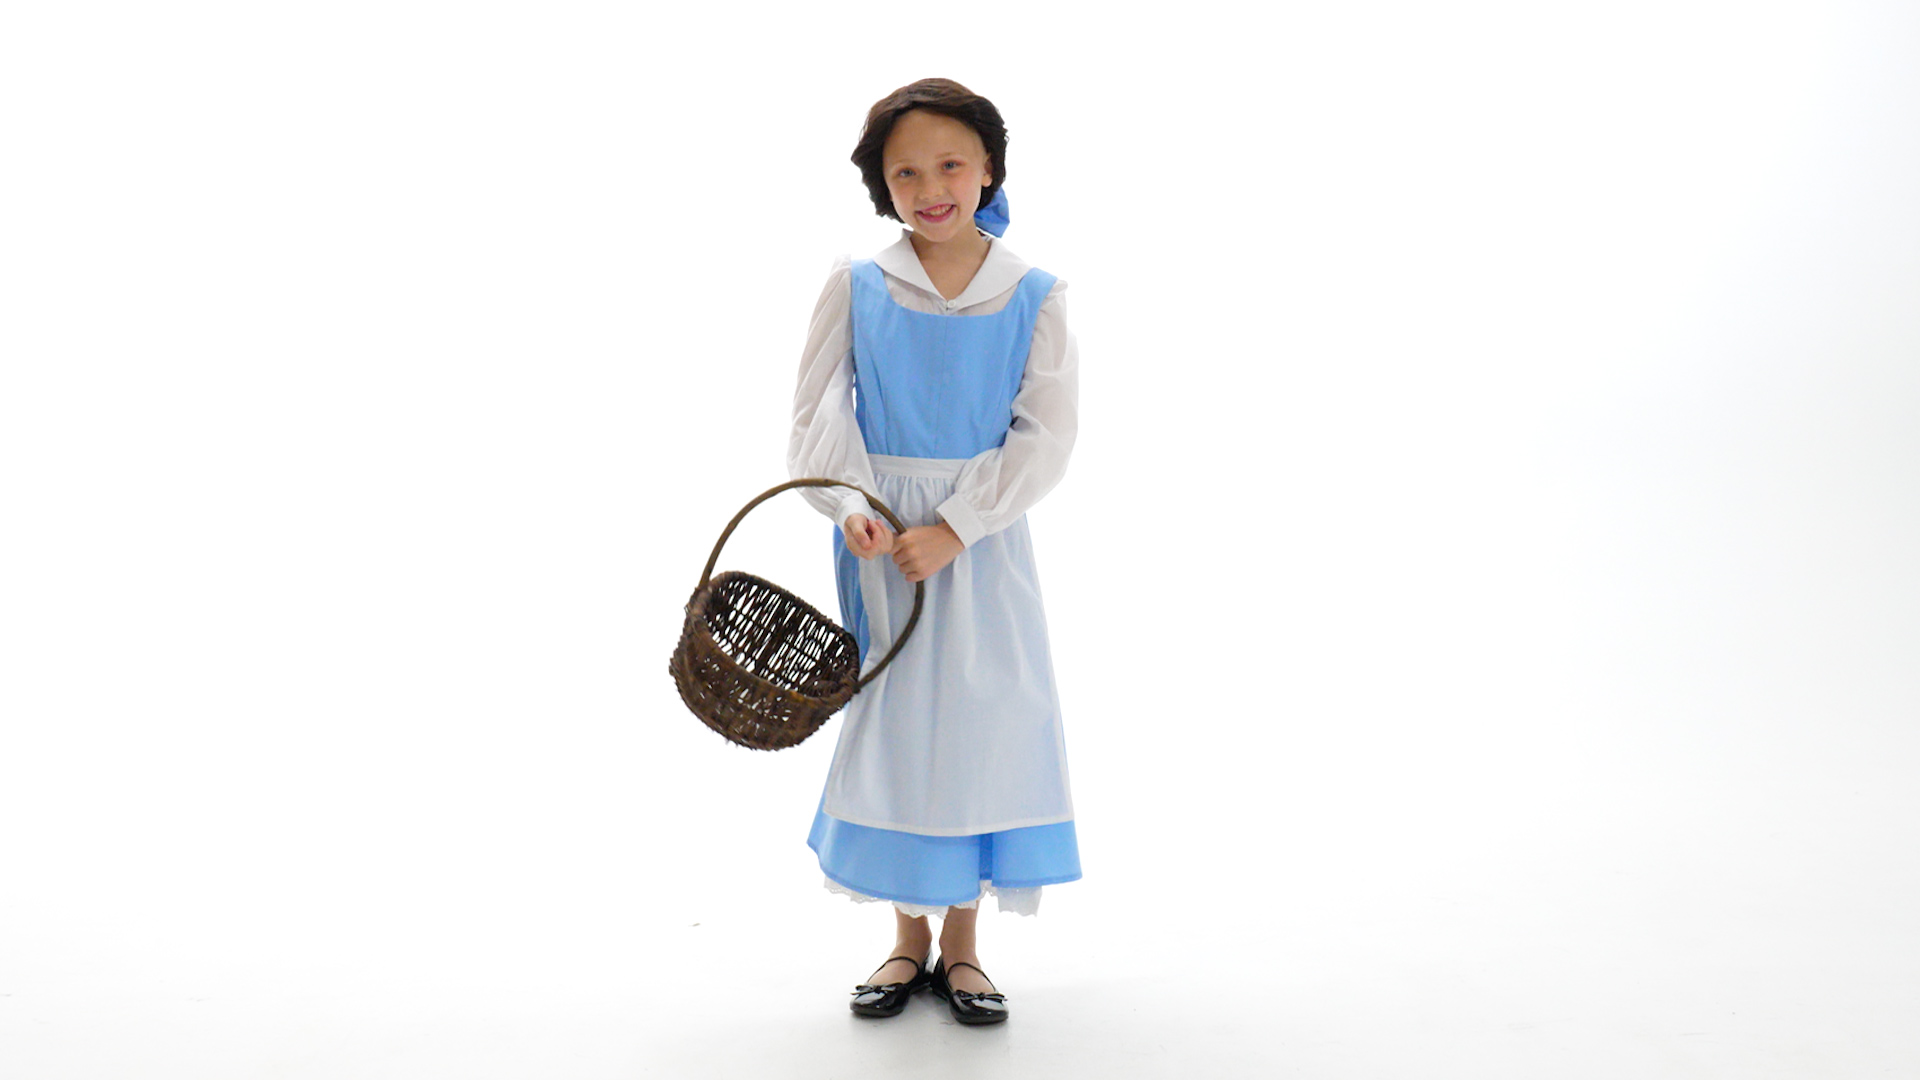 Kids Beauty and the Beast Belle Blue Dress Costume